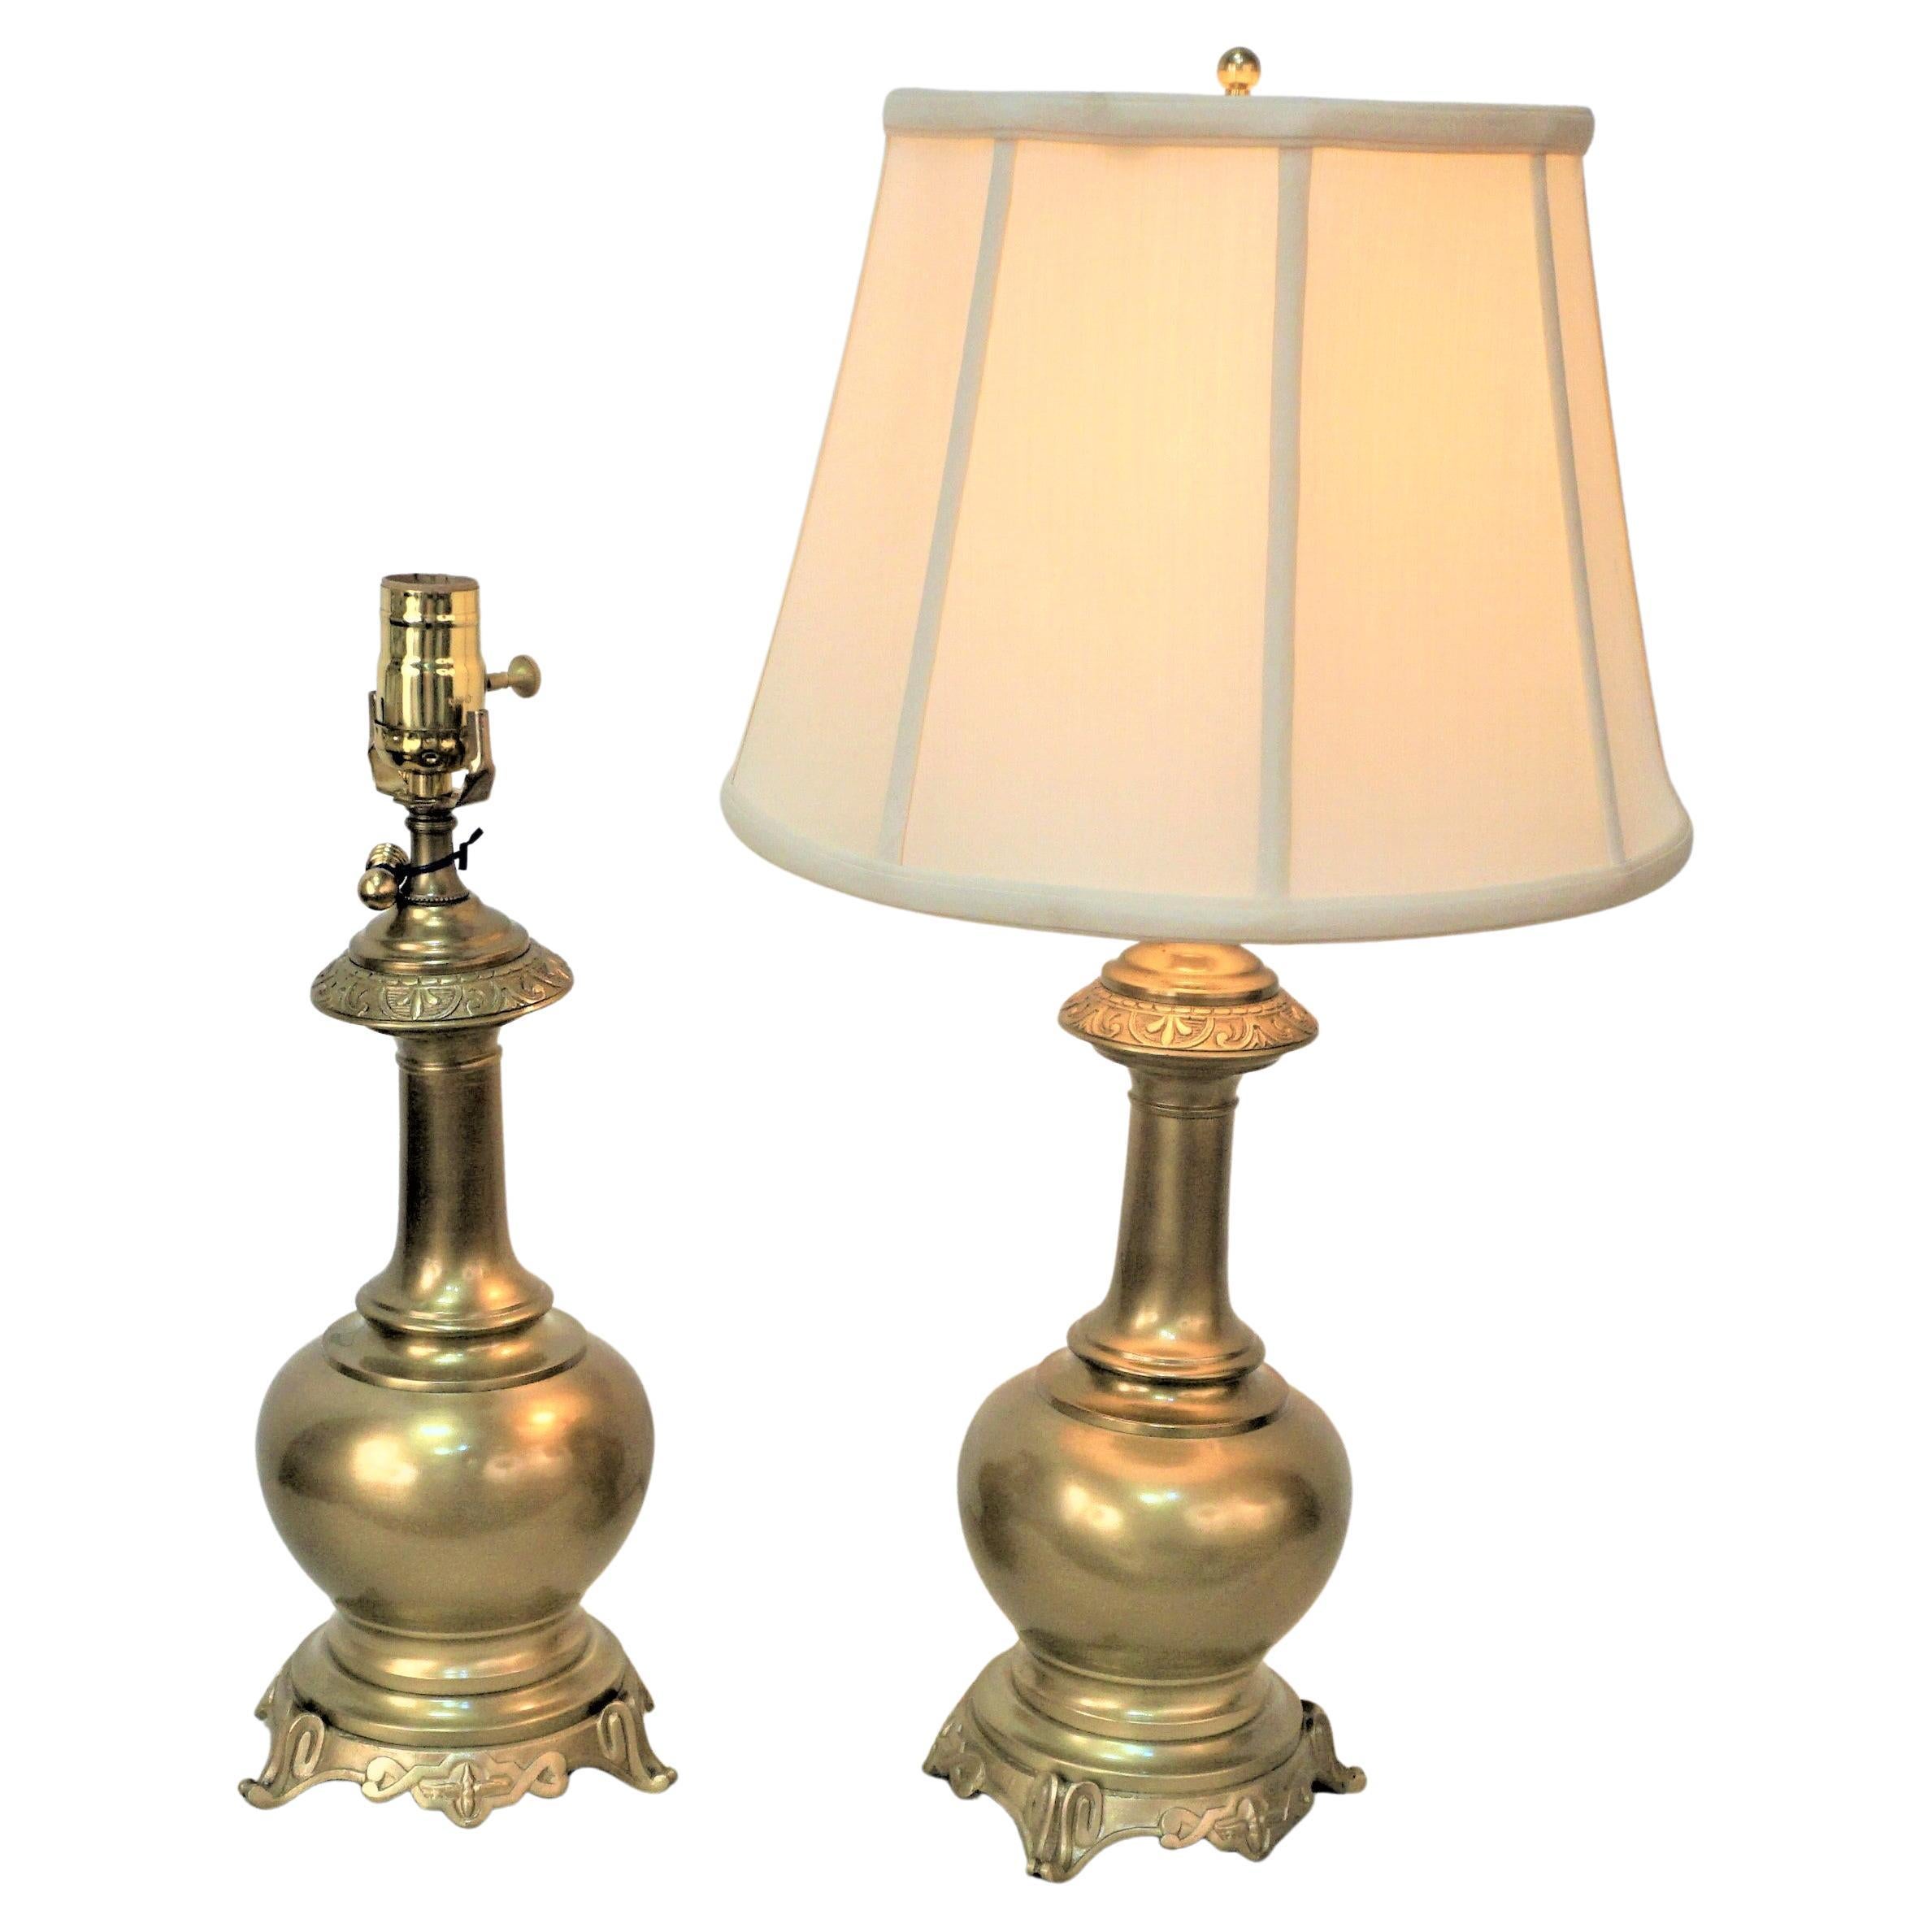 Pair of 19th Century Electrified Oil Lamps